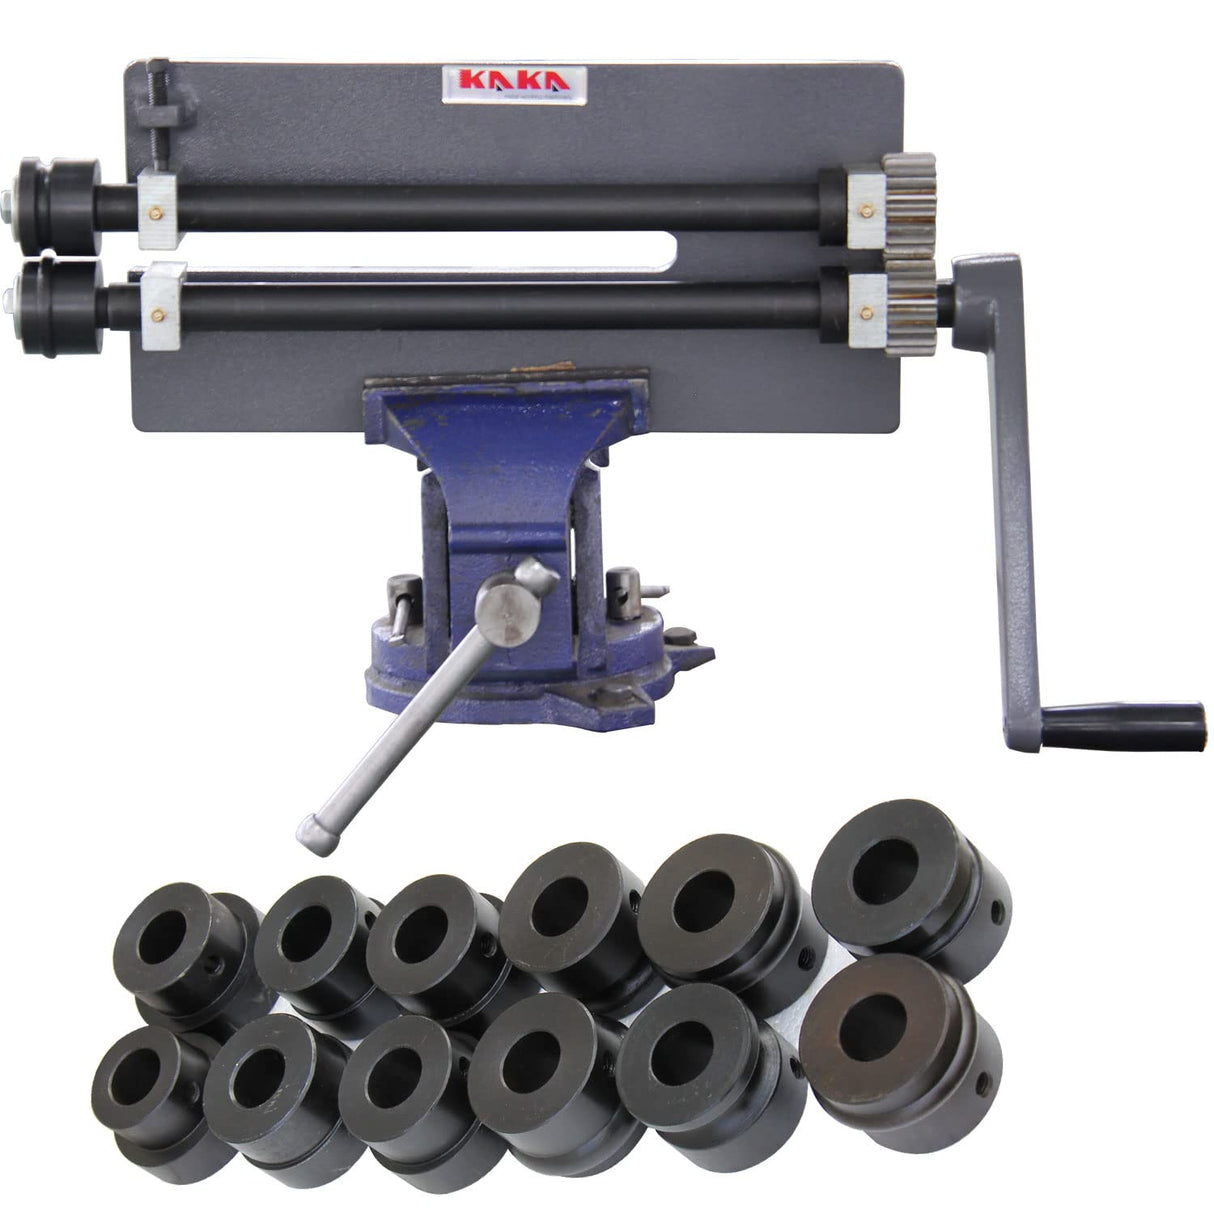 Whether you're a professional metalworker or a DIY enthusiast, the Kaka Industrial RM-18 Bead Roller Kit is the perfect tool for creating flawless metal beads every time.